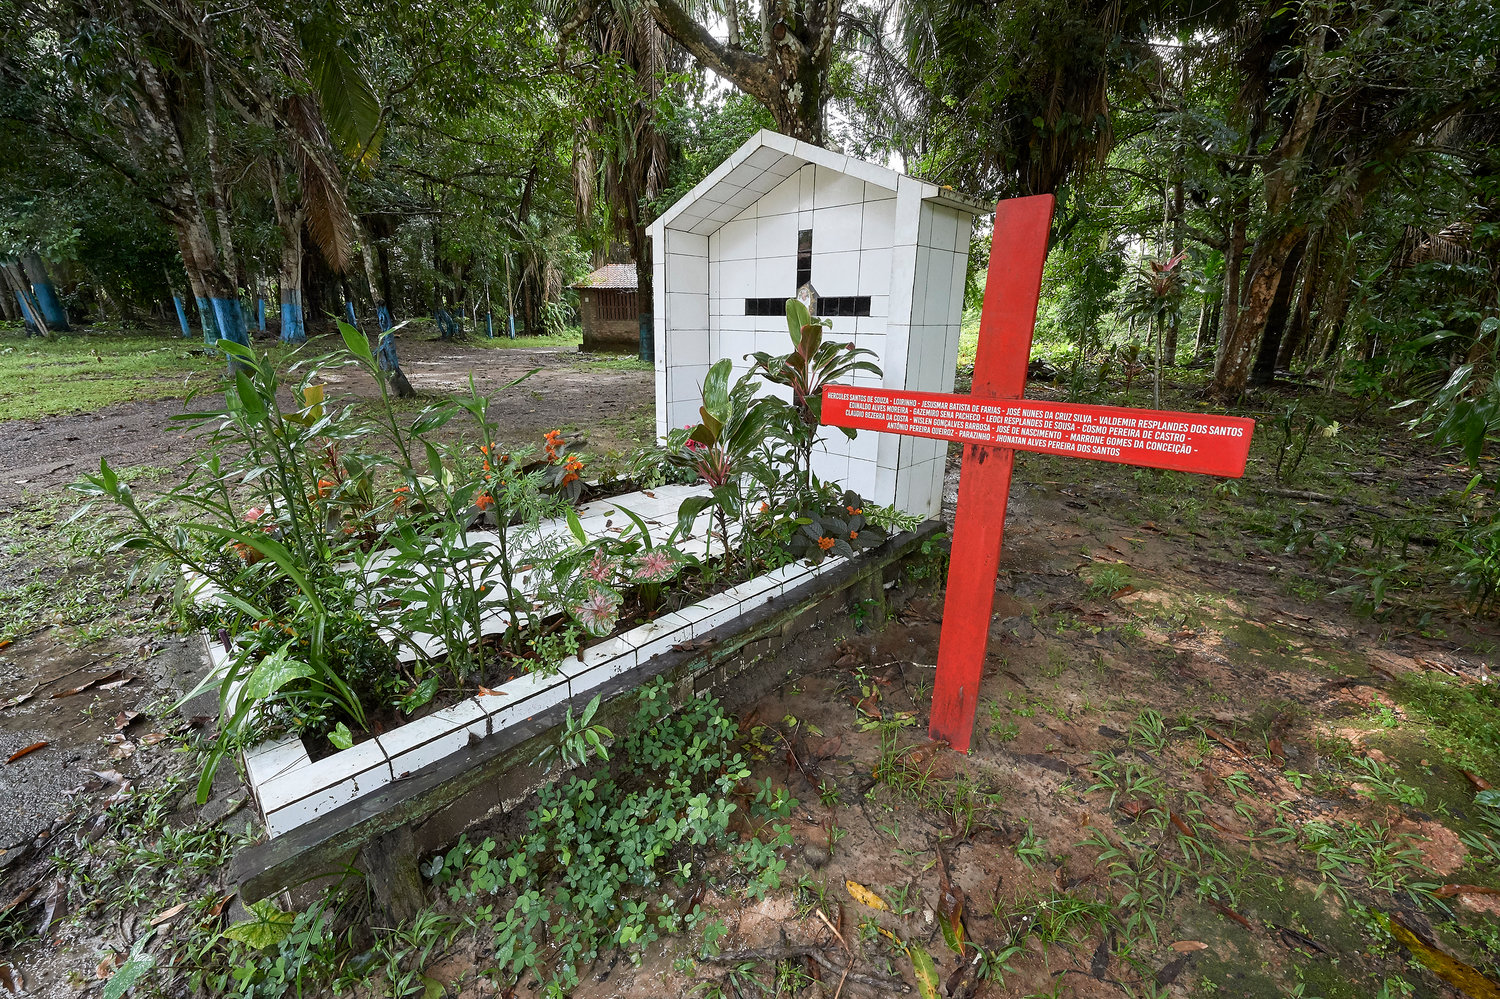 A red cross stands beside the grave of U.S.-born Sister Dorothy Stang in Anapu, Brazil. Sister Stang was assassinated in 2005. The red cross beside her grave bears the names of 16 local rights activists murdered since her killing. Church activists say the killings continue, and by April 2019 they were about to erect a second red cross with even more names.